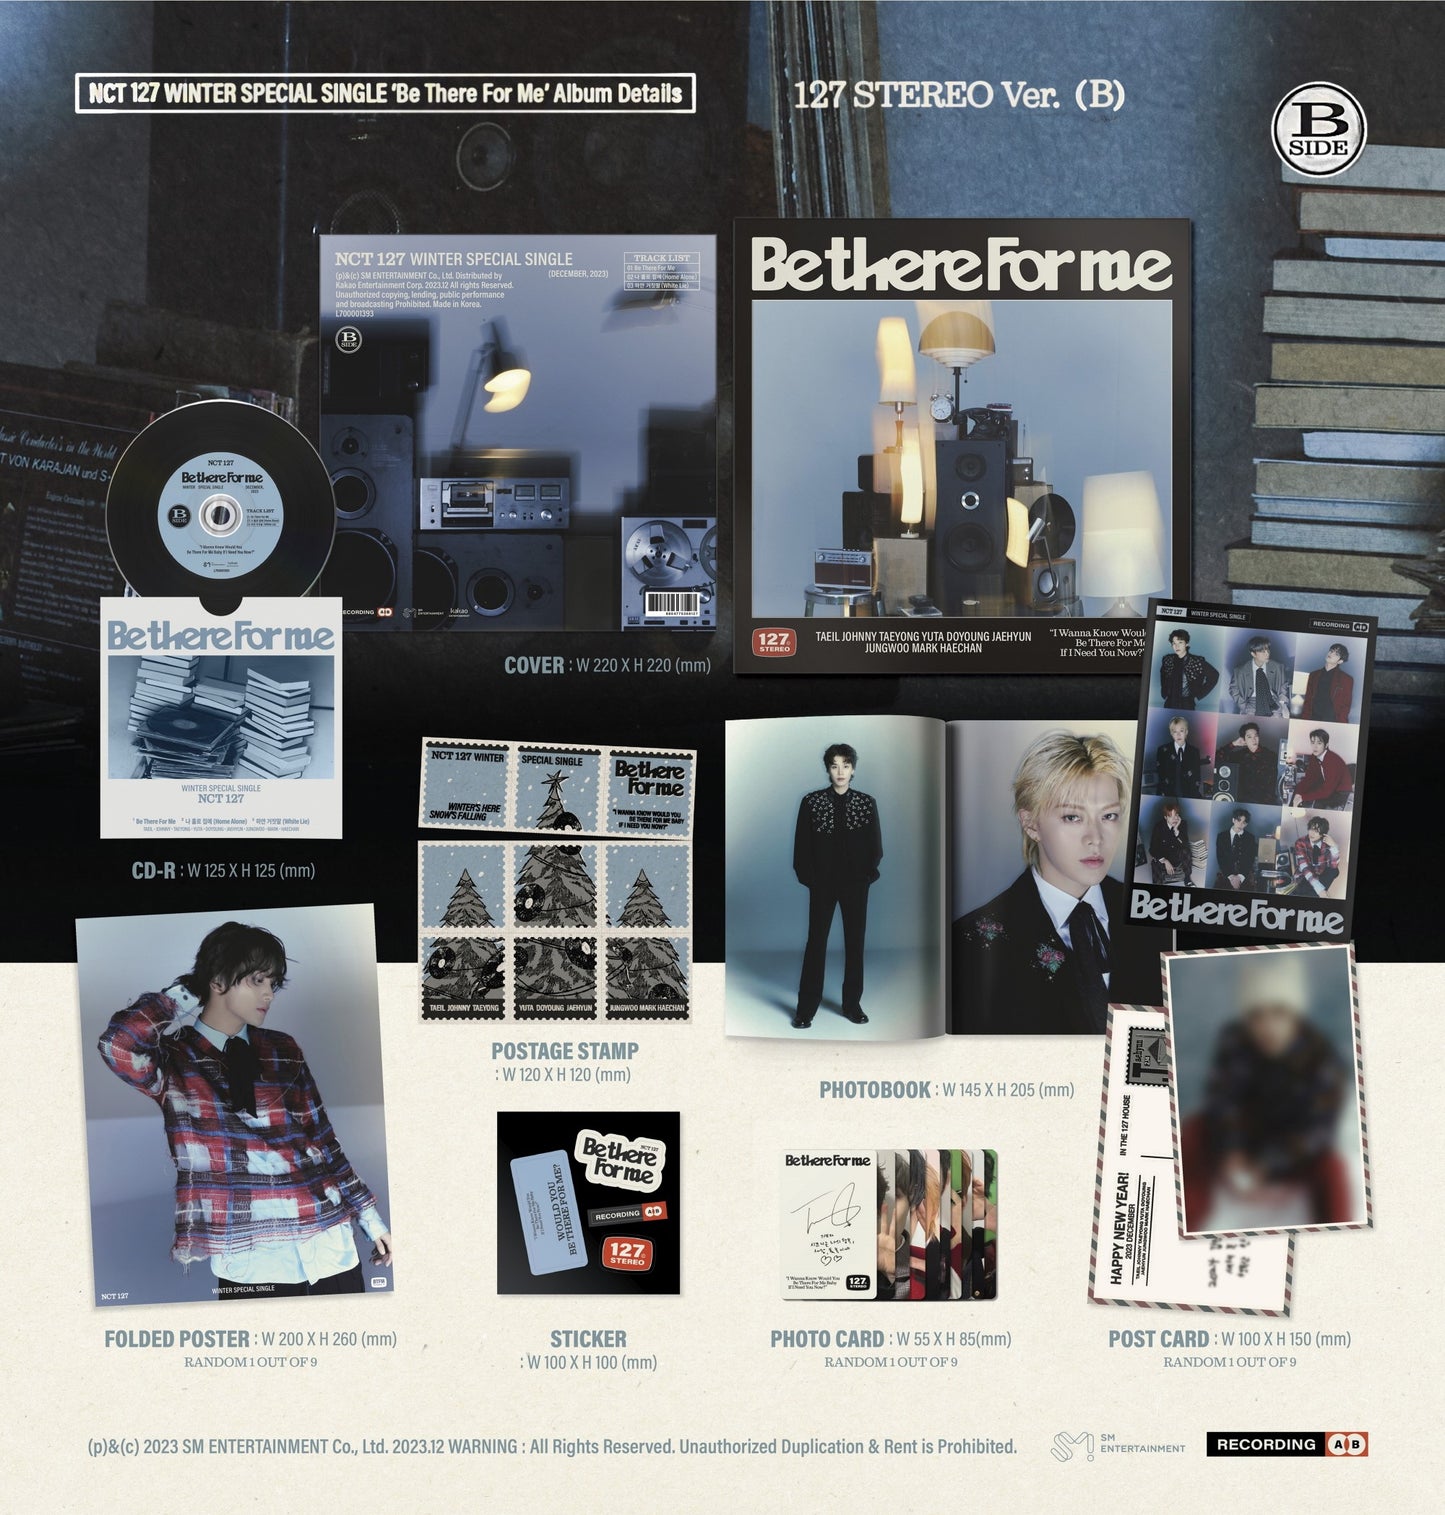 jstoreonline_NCT_127_WINTER_SPECIAL_SINGLE_127_STEREO_Ver